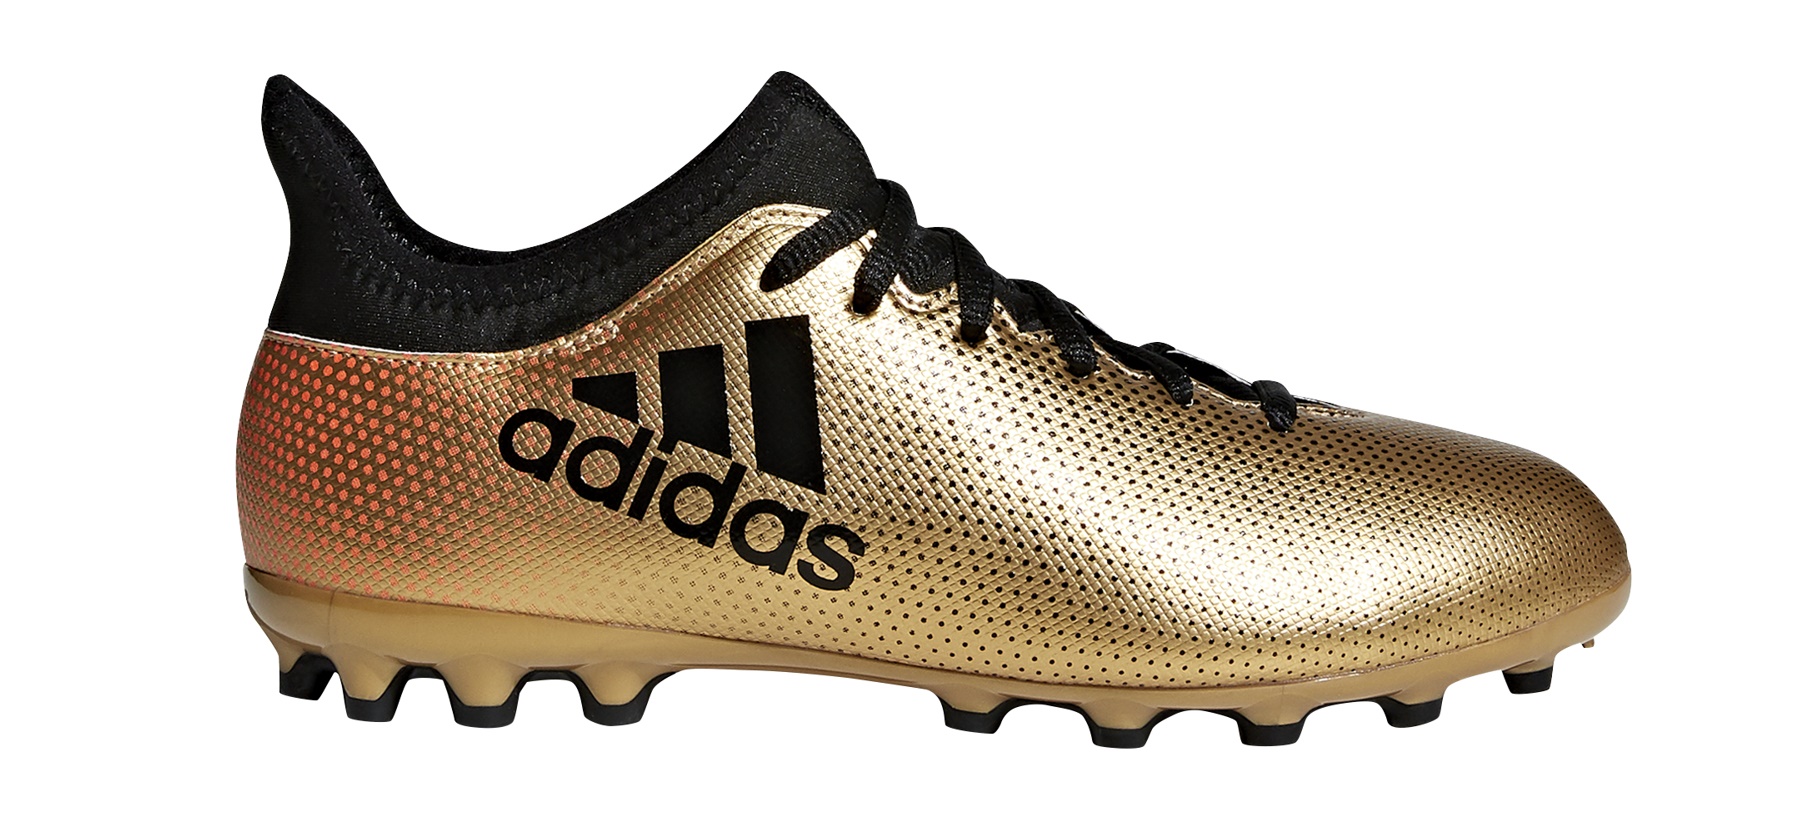 Football boots Child Adidas X 17.3 AG Skystalker Pack وانيت